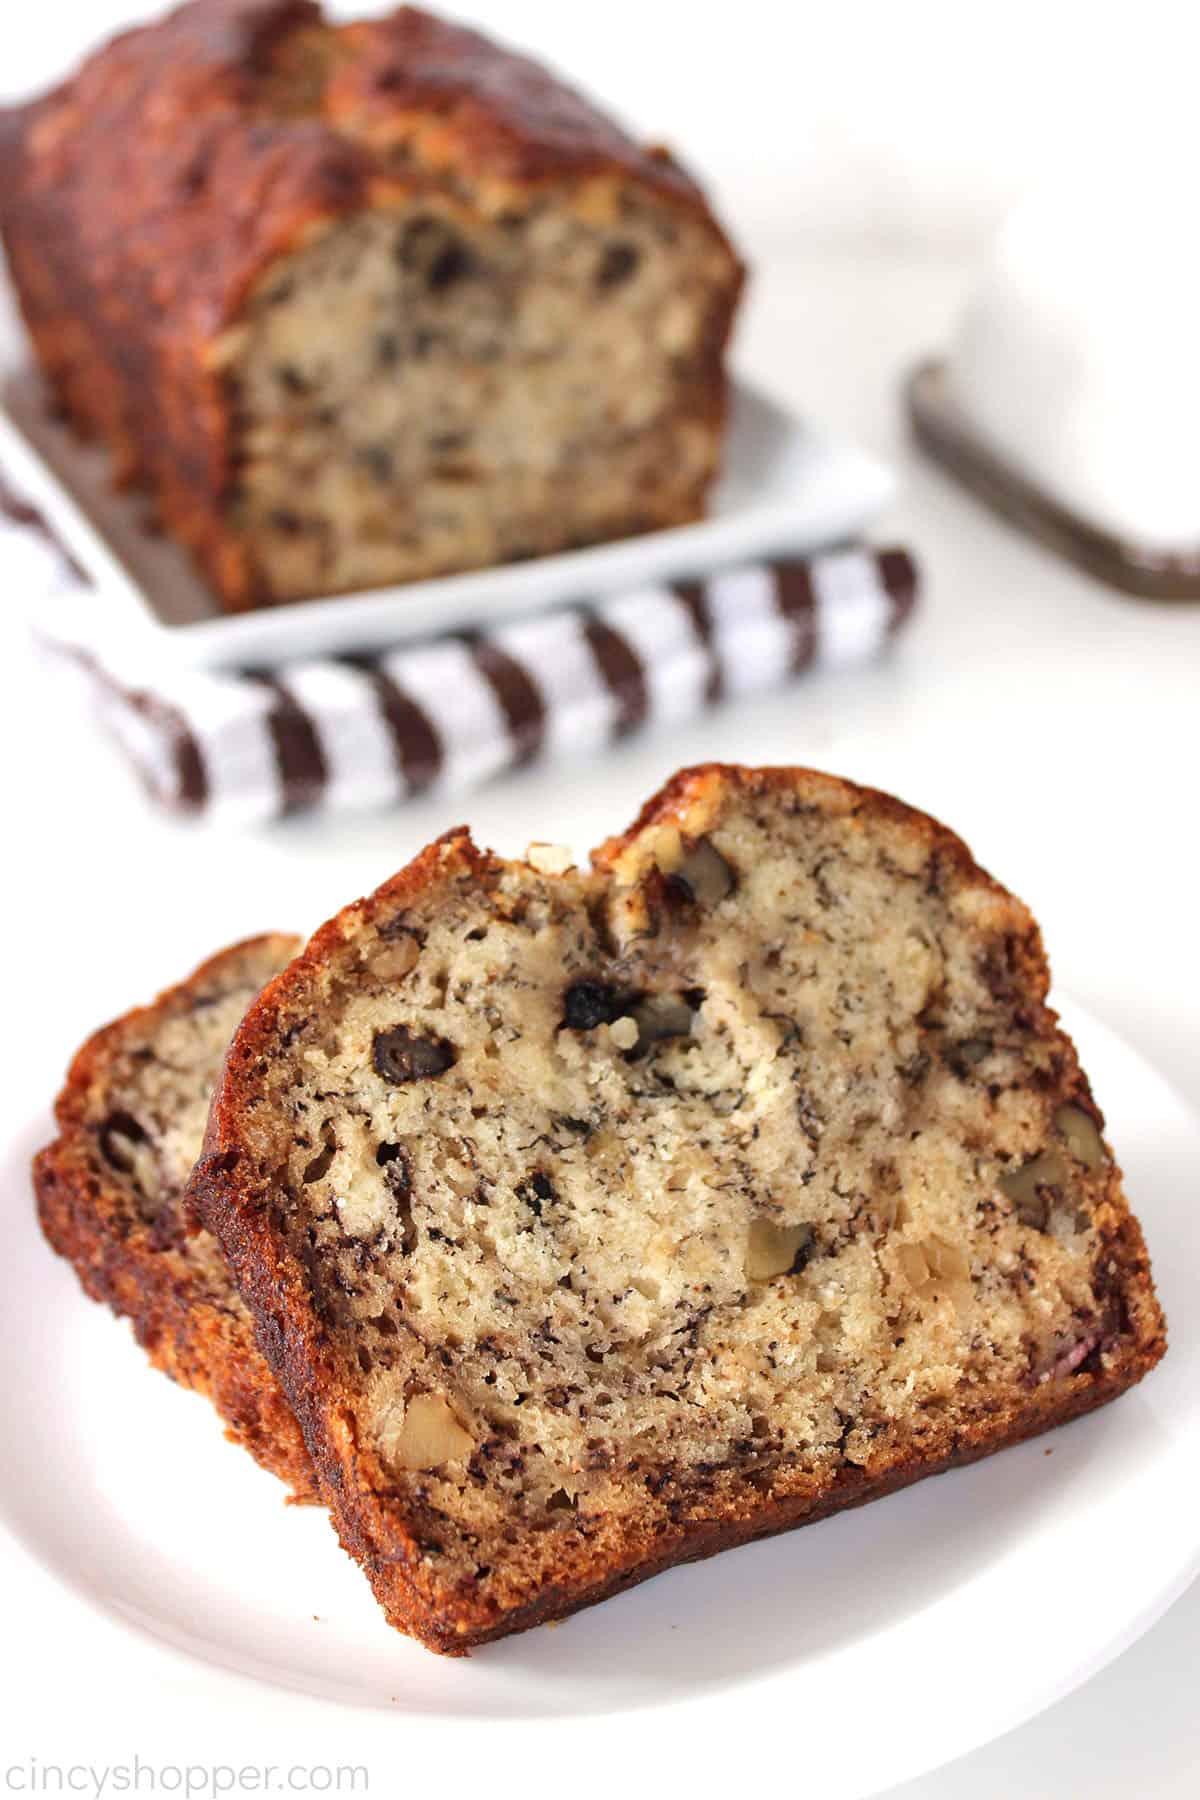 Sliced banana bread with loaf in the background.